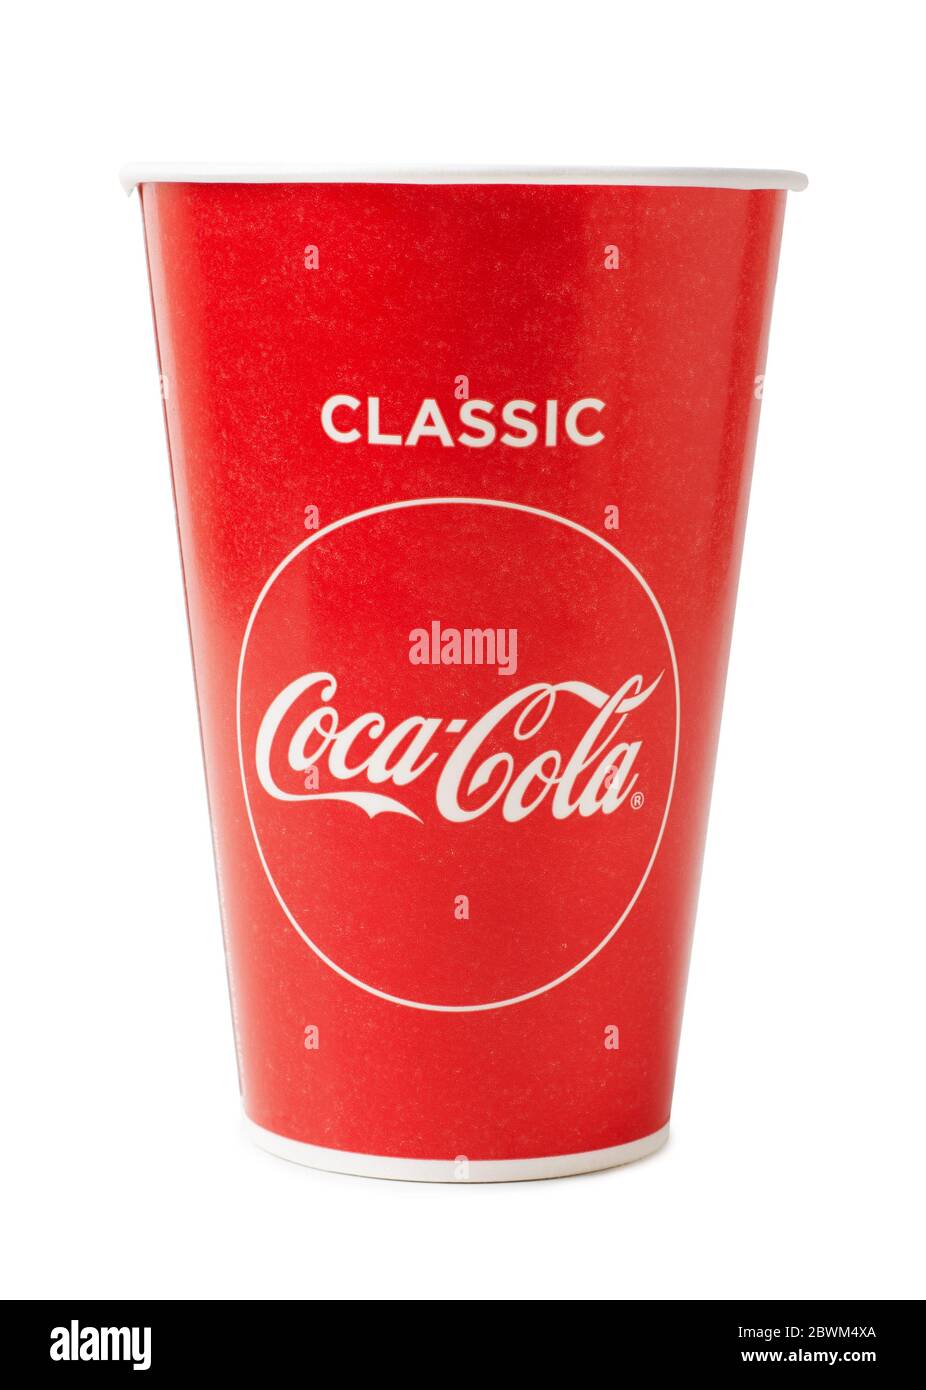 https://c8.alamy.com/comp/2BWM4XA/moscow-russia-january-12-2020-classic-coca-cola-cup-isolated-on-white-background-coca-cola-company-is-the-most-popular-market-leader-in-the-world-2BWM4XA.jpg